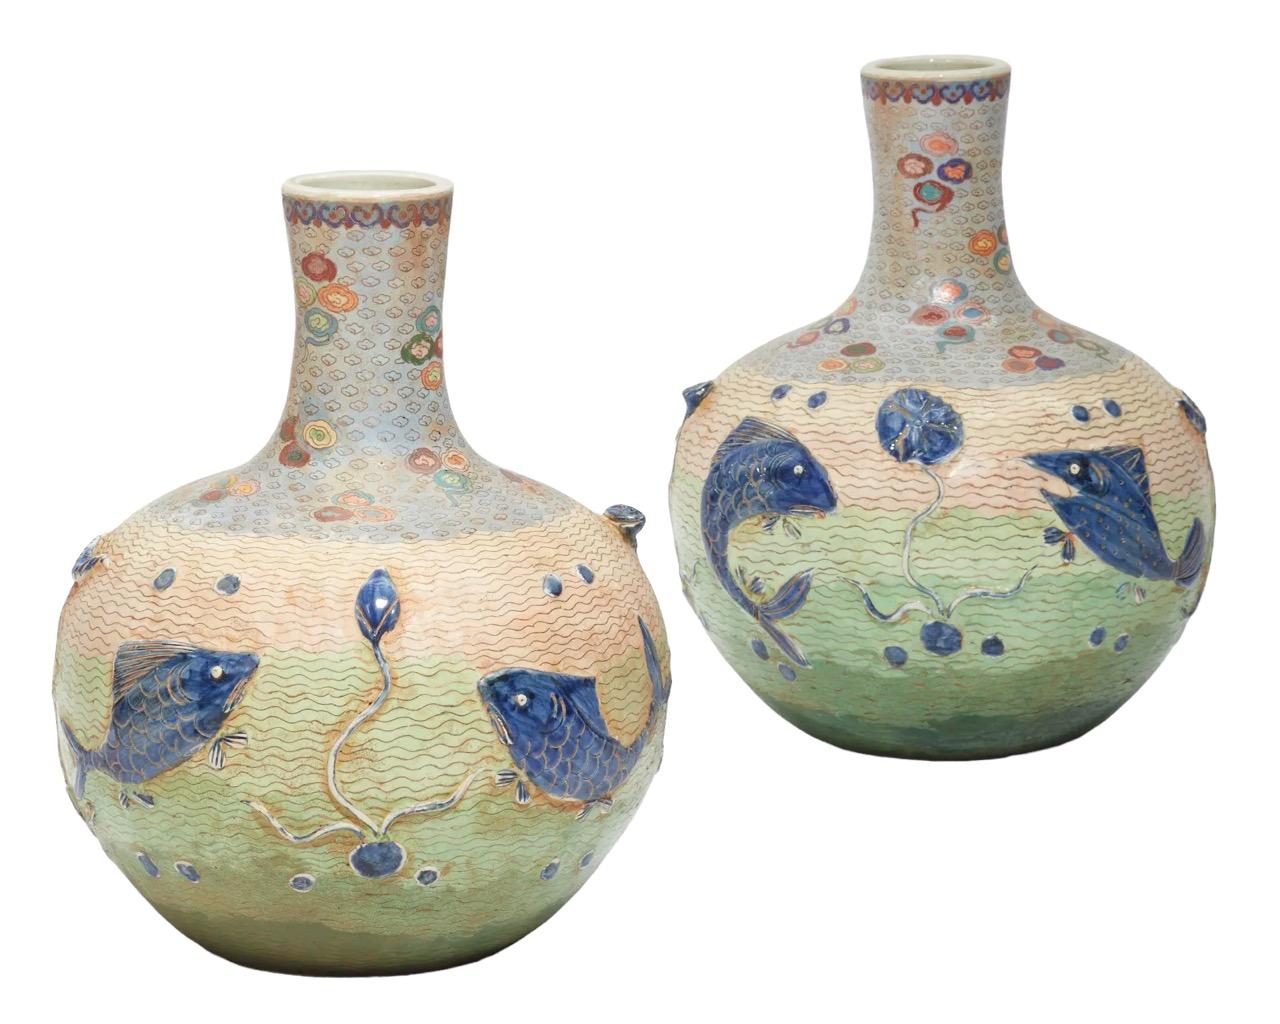 Behold a remarkable pair of early 20th-century Chinese cloisonné enameled porcelain vases, harkening from the 1900s. These vases are a visual symphony, adorned with intricately molded relief, featuring a mesmerizing aquatic tableau of fish in a